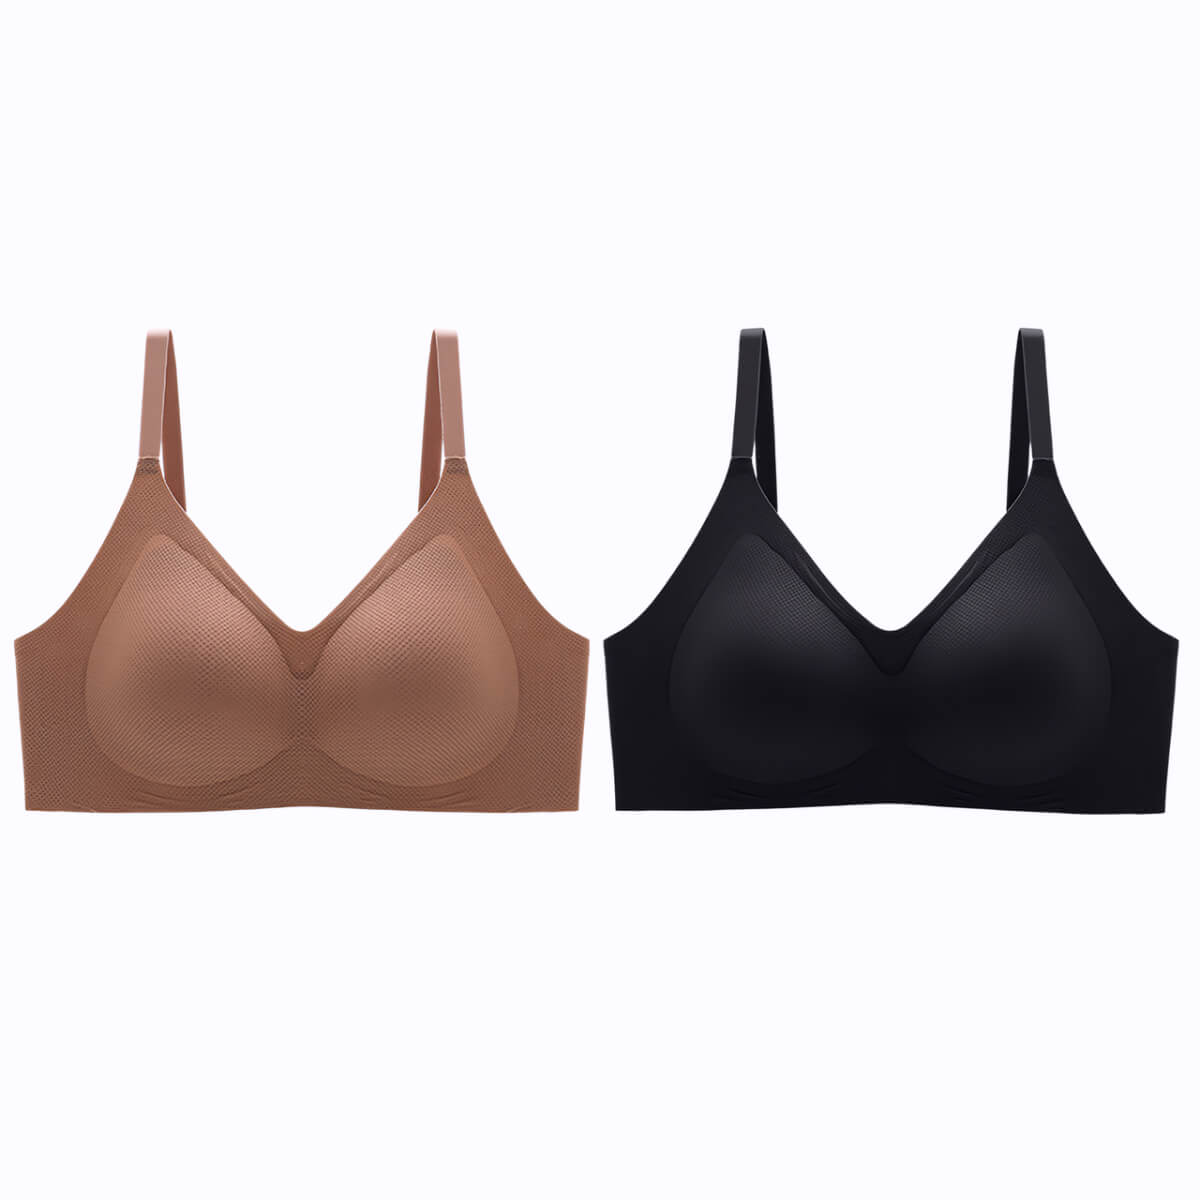 DailyWear Womens Everyday 6 Pack of Bras (30A, 4190P2) at